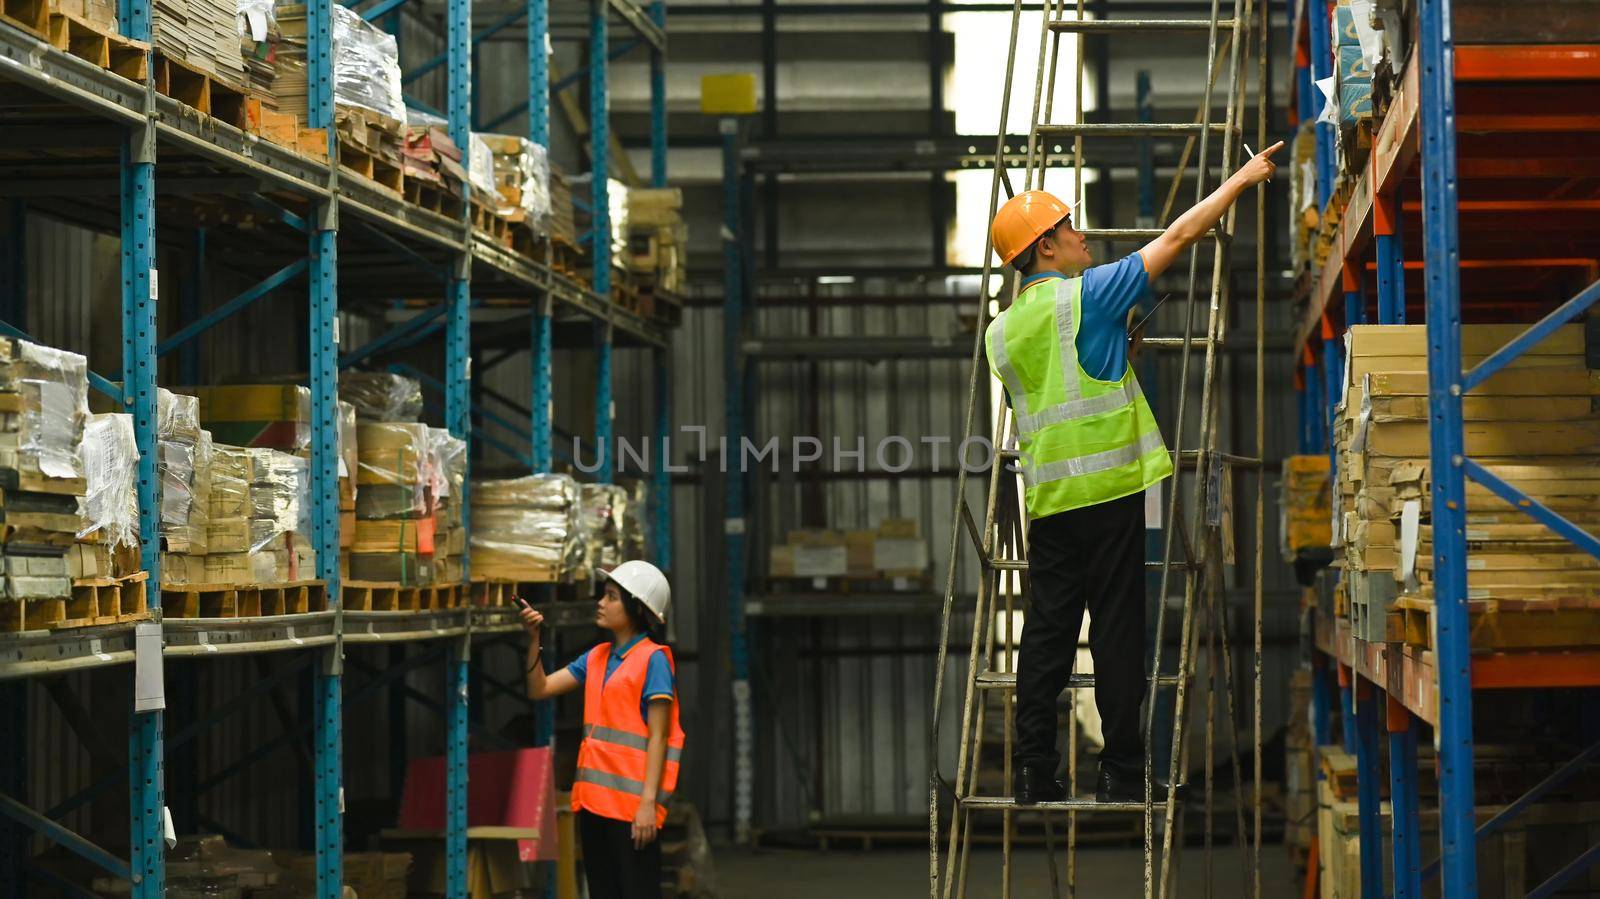 Workers working about shipment in logistic distribution warehouse with tall shelves full of packed boxes and goods.